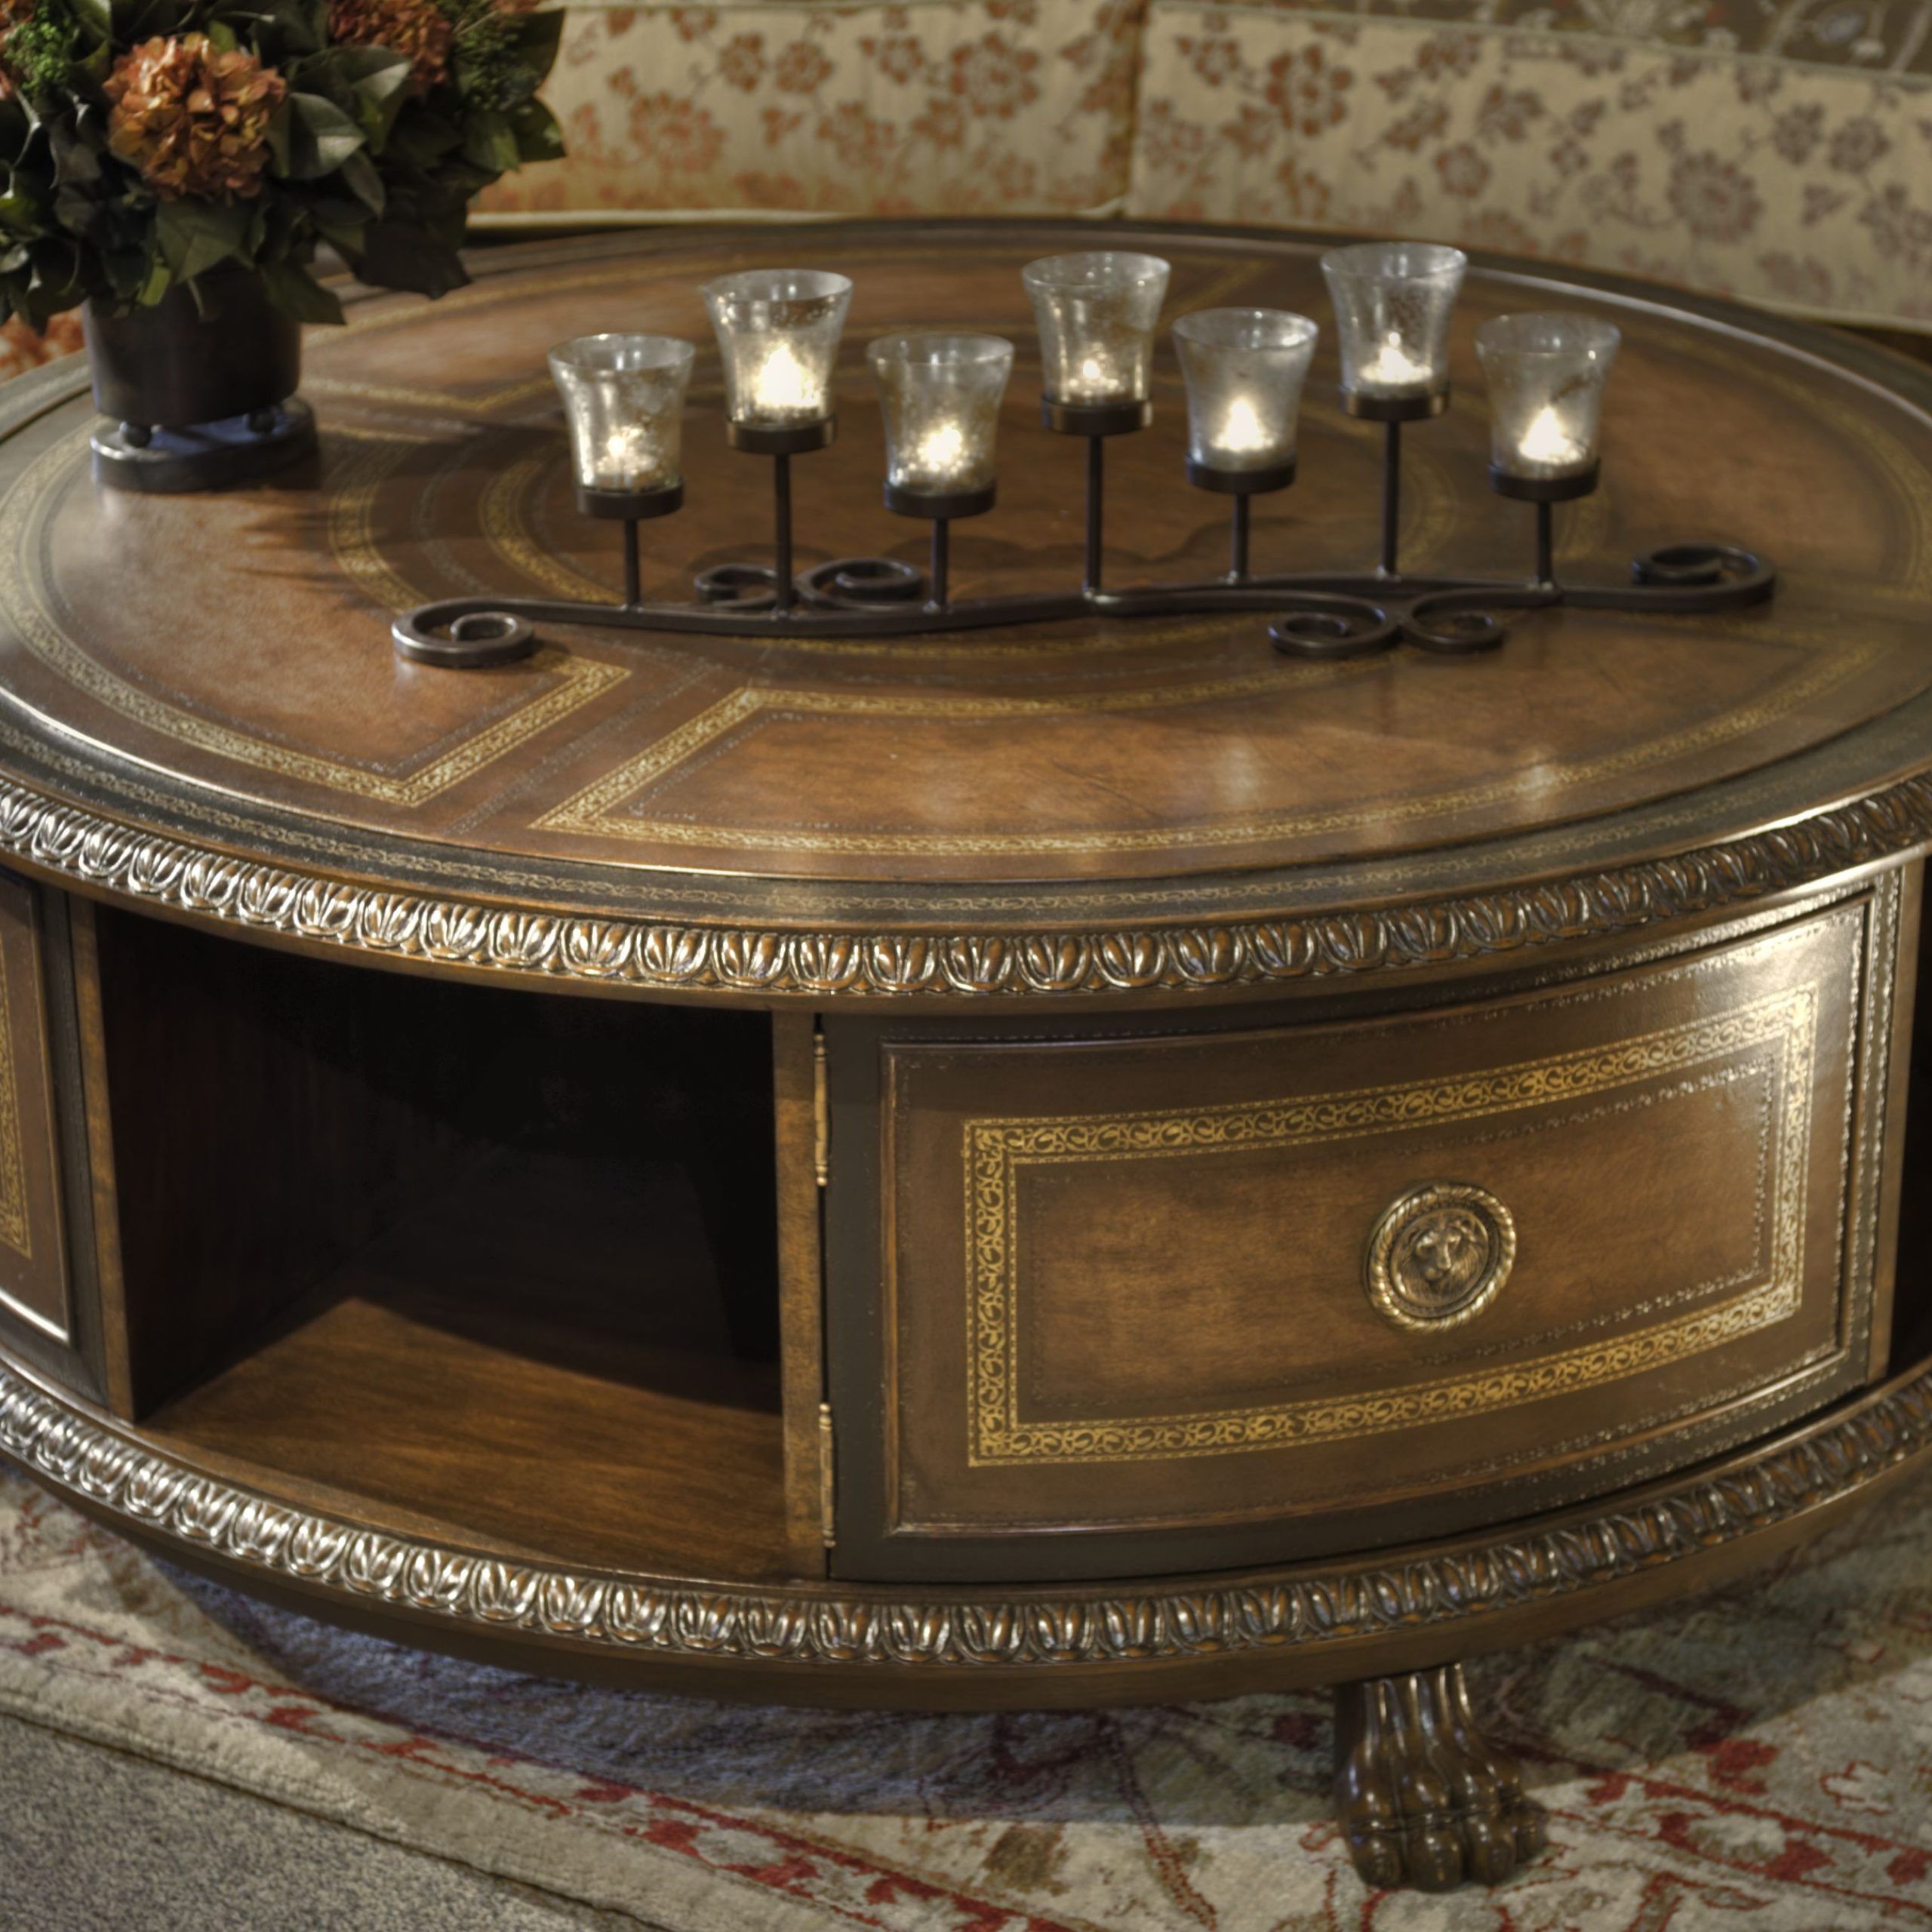 Unique Round Coffee Tables For Every Style And Home – Coffee Table Decor With Monaco Round Coffee Tables (Gallery 20 of 20)